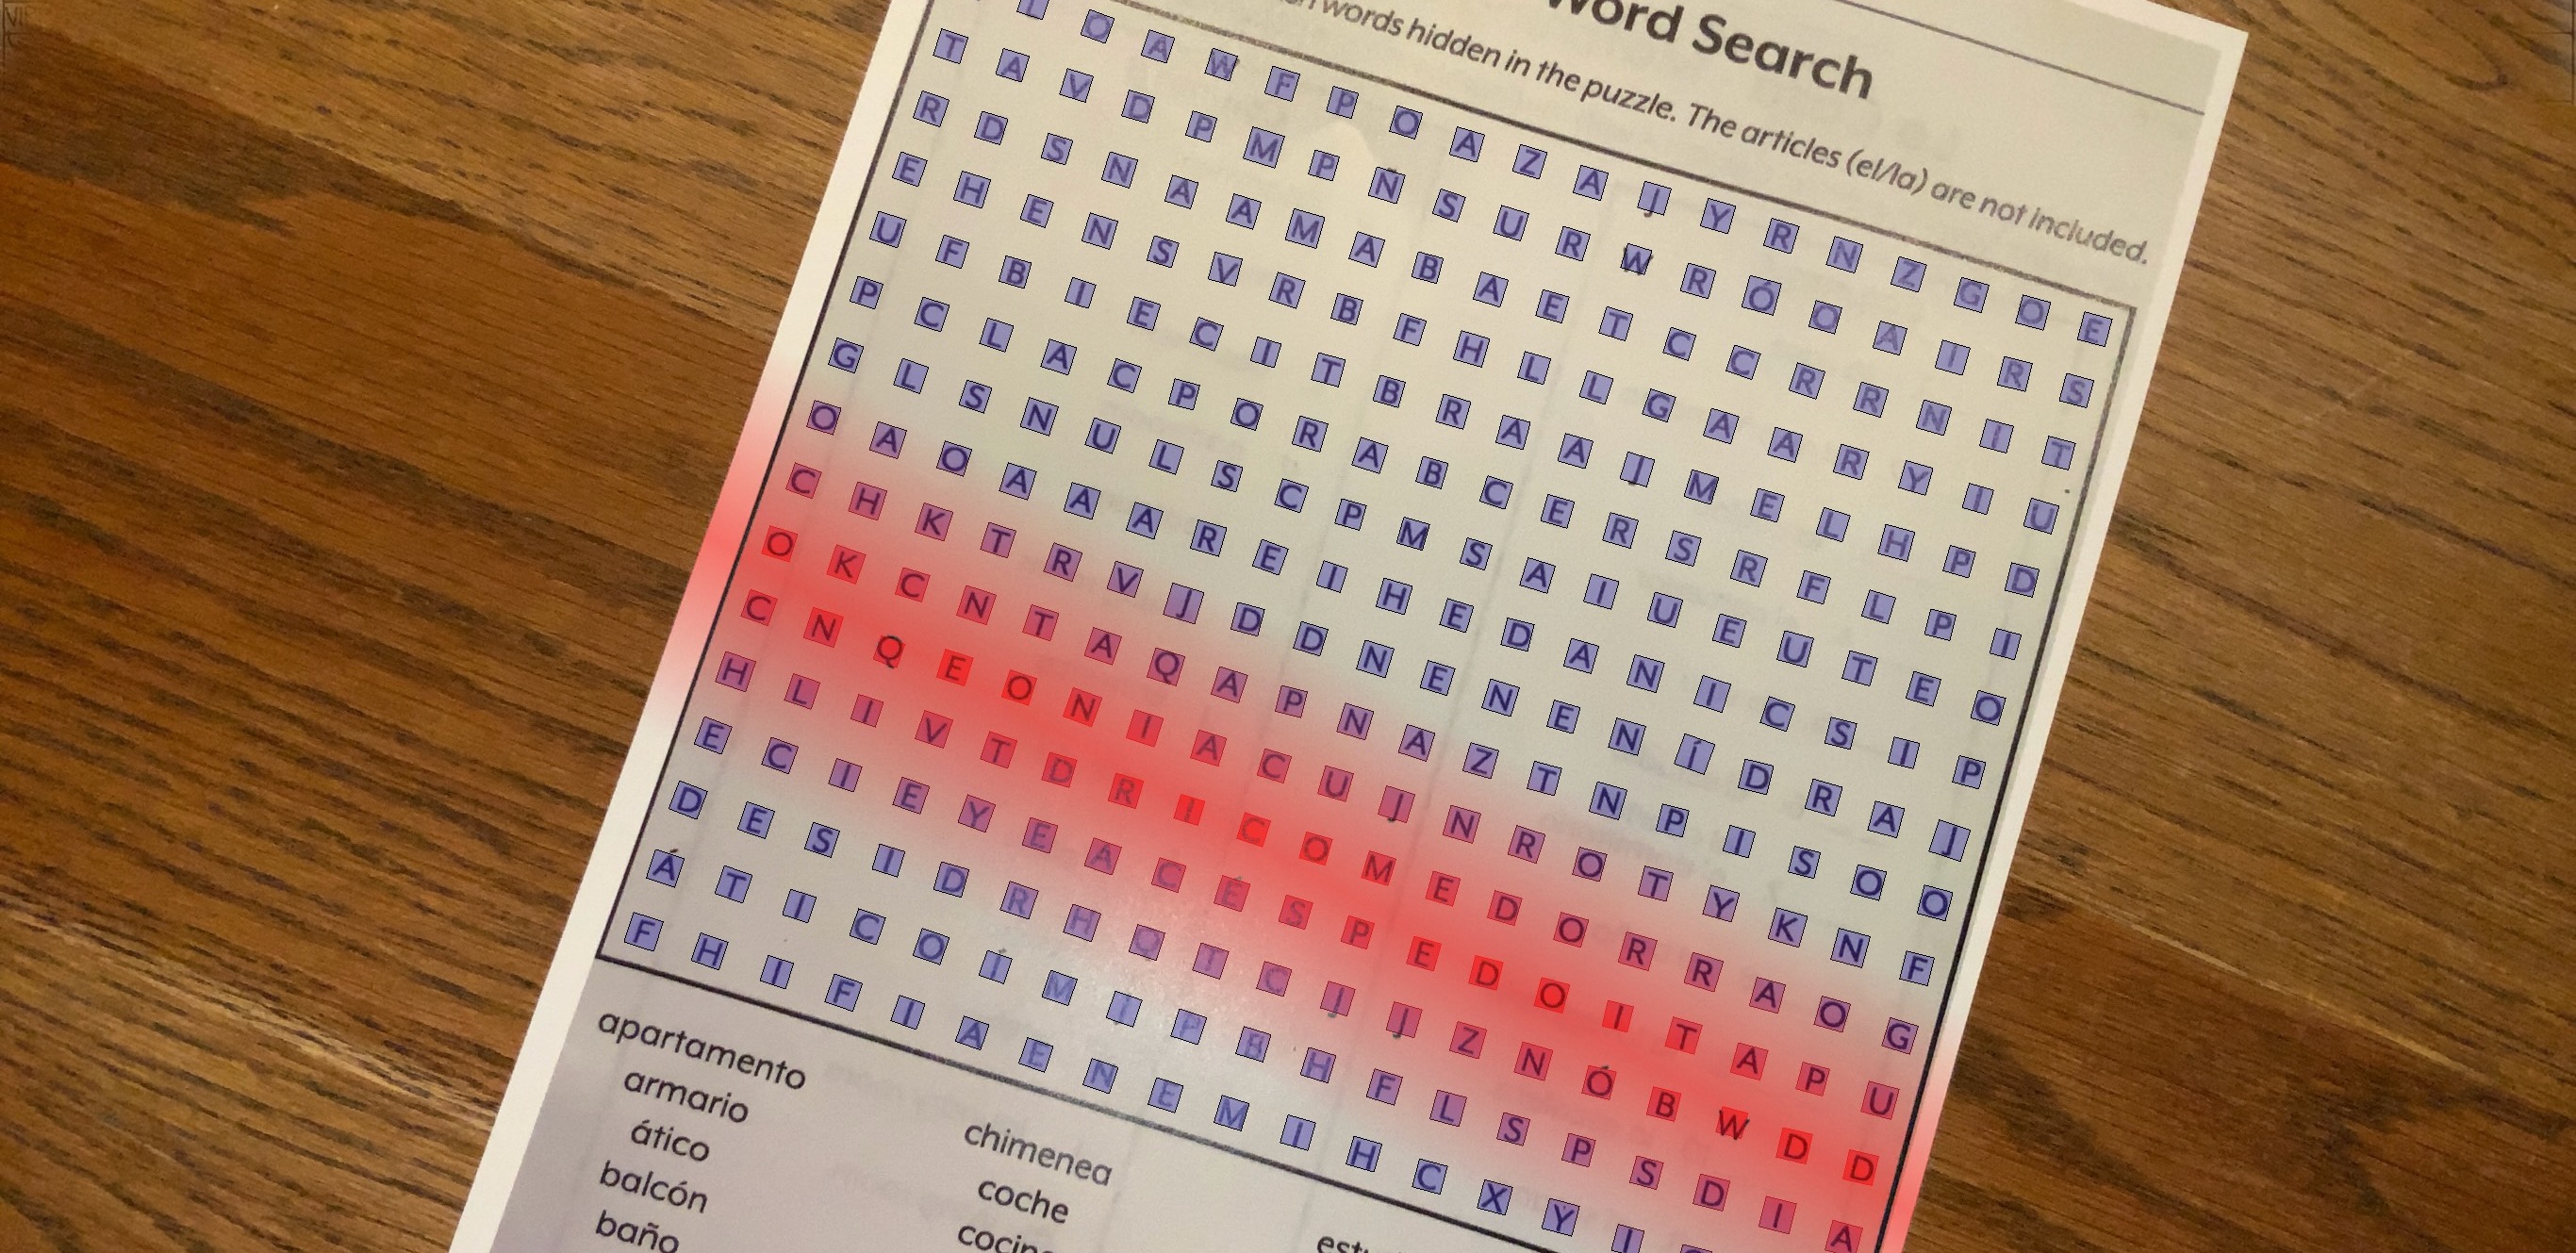 word-search-scanner-and-solver